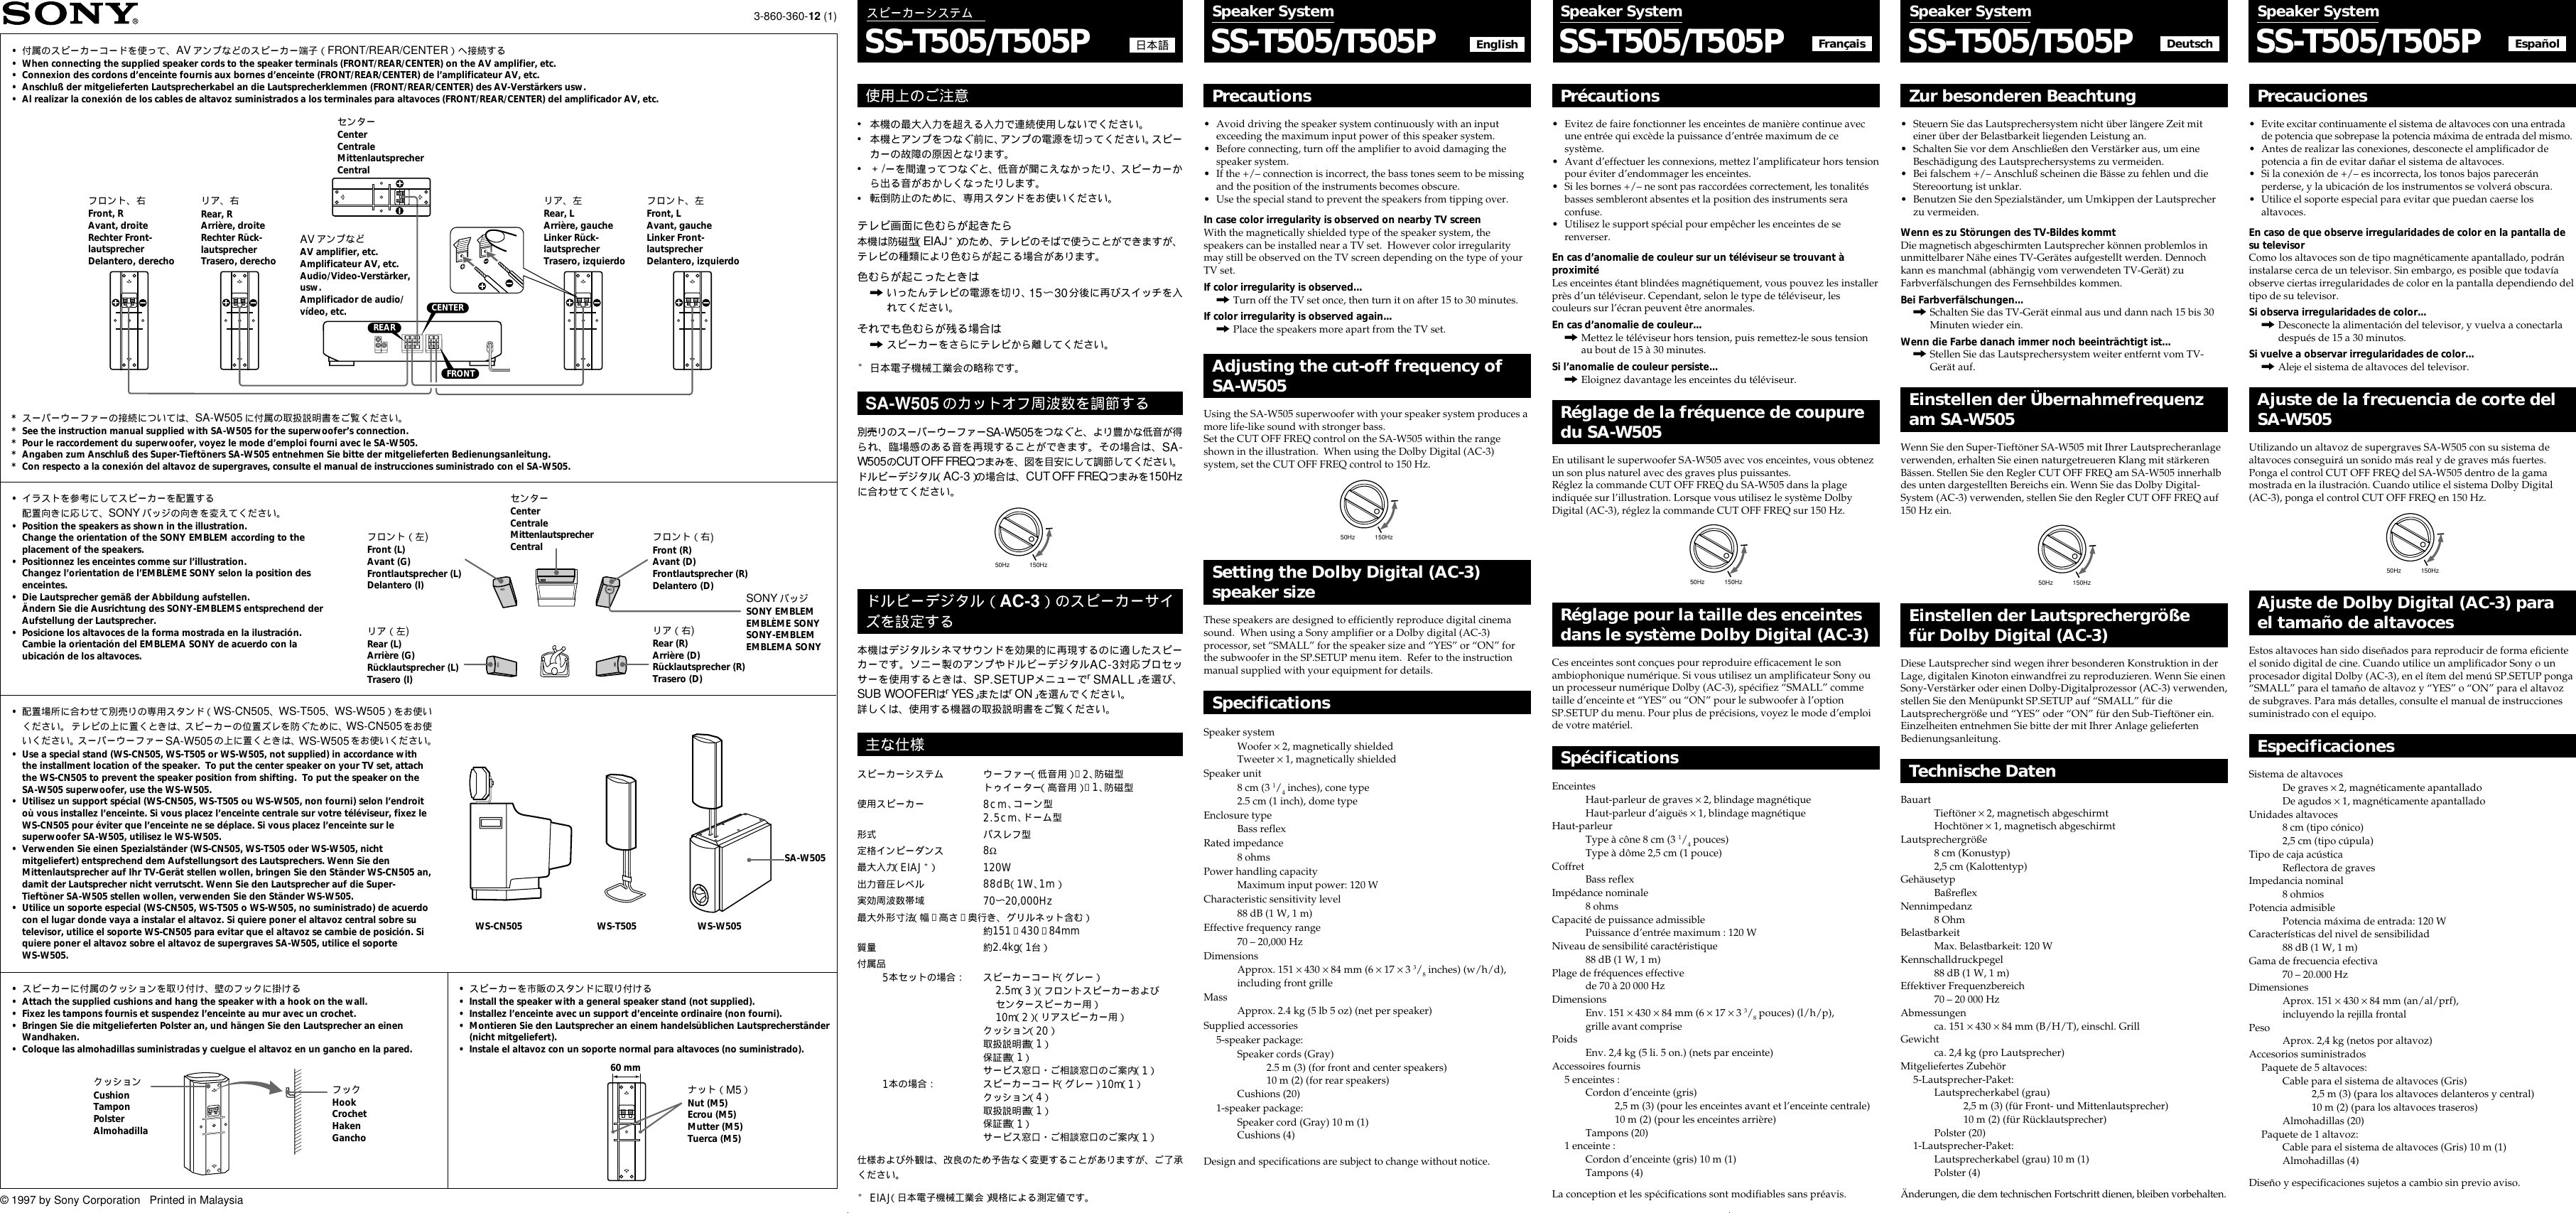 Page 1 of 2 - Sony Sony-Ss-T505-Users-Manual- Pdf  Sony-ss-t505-users-manual